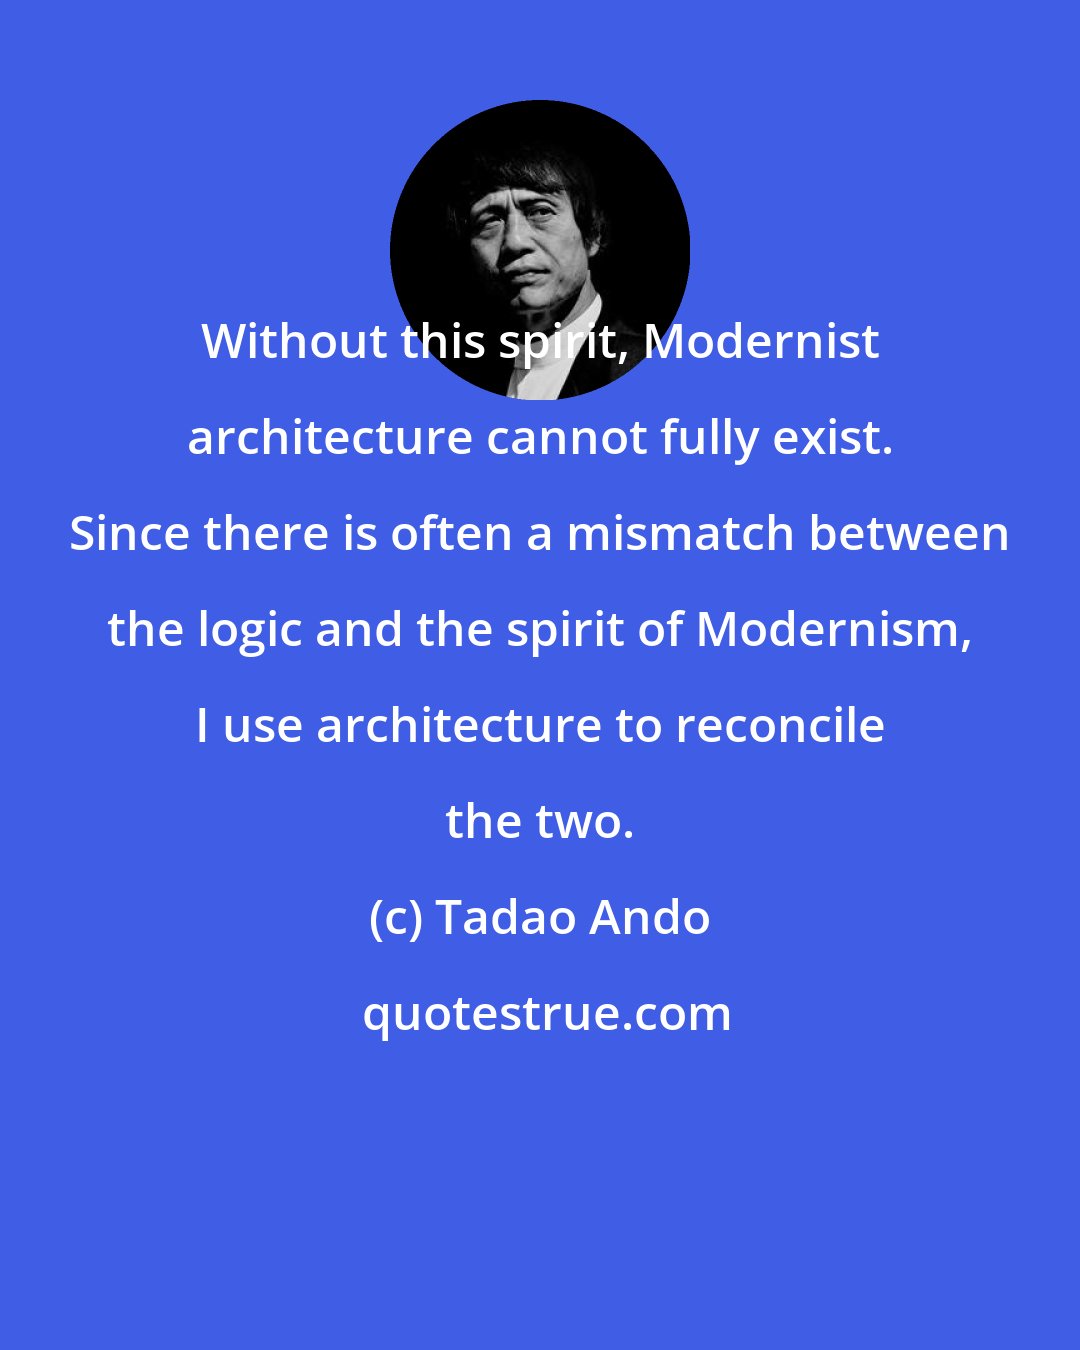 Tadao Ando: Without this spirit, Modernist architecture cannot fully exist. Since there is often a mismatch between the logic and the spirit of Modernism, I use architecture to reconcile the two.